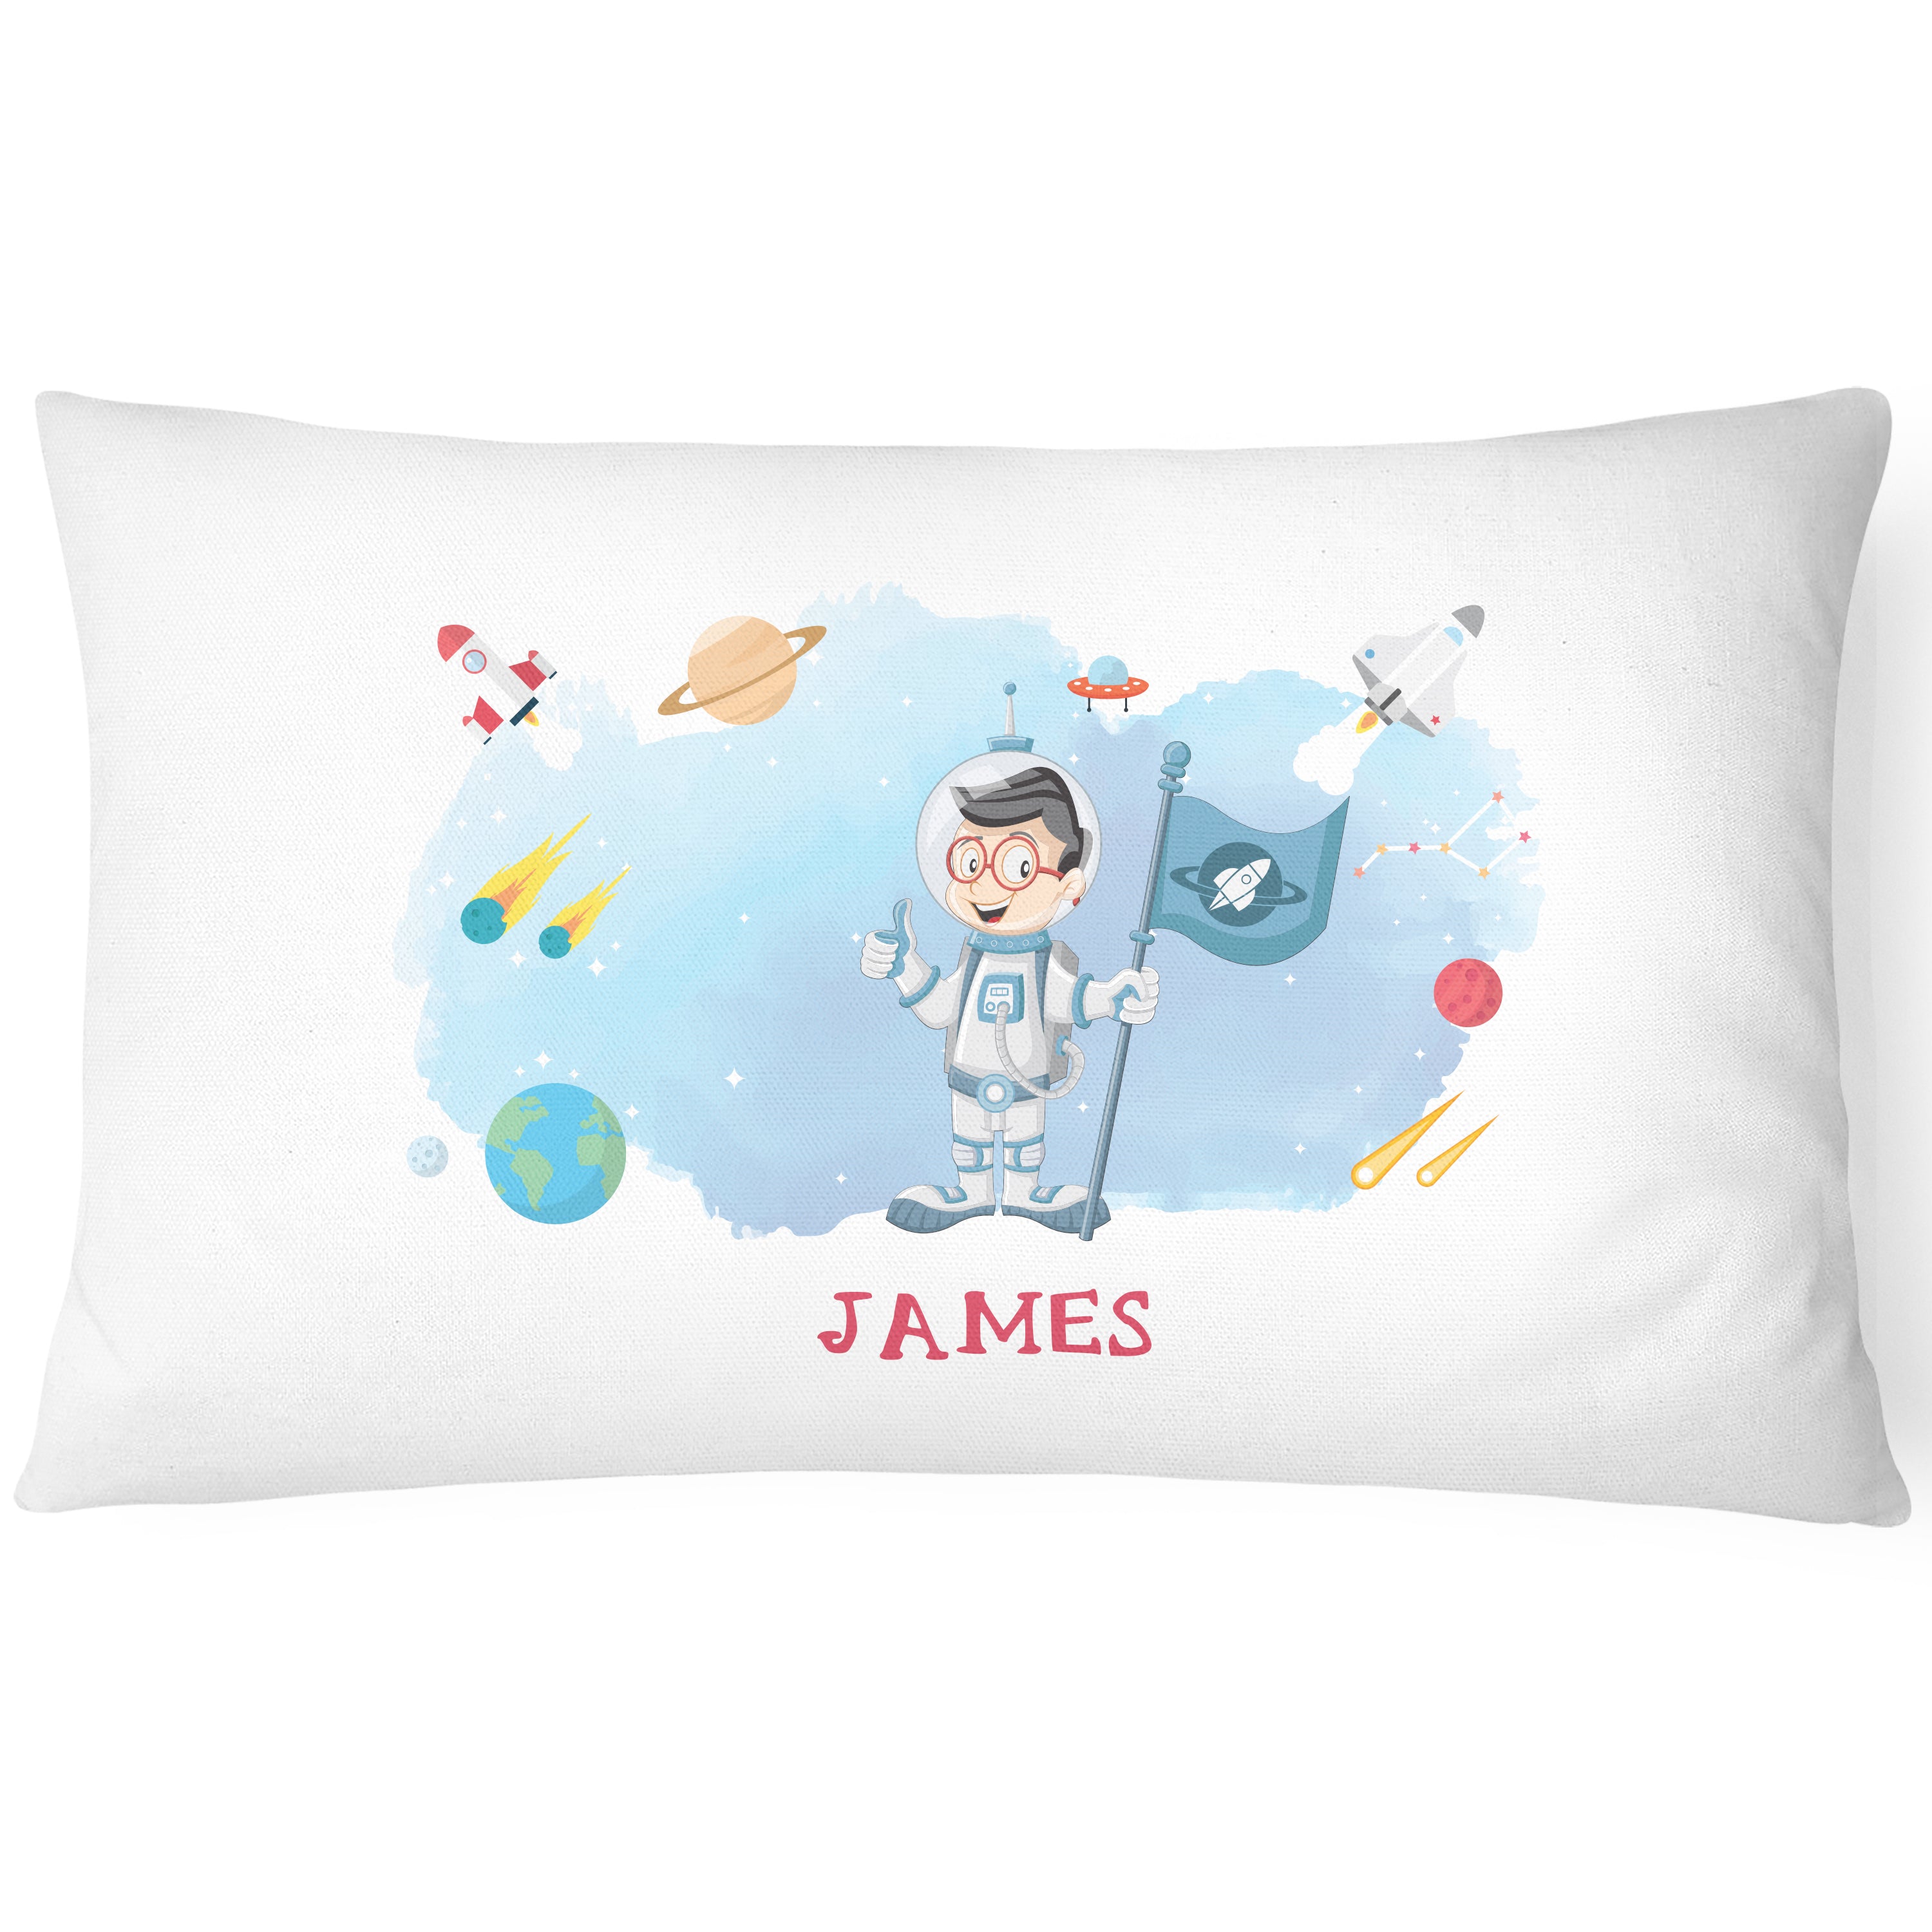 Space Pillowcase for Kids - Personalise With Any Name - Planted